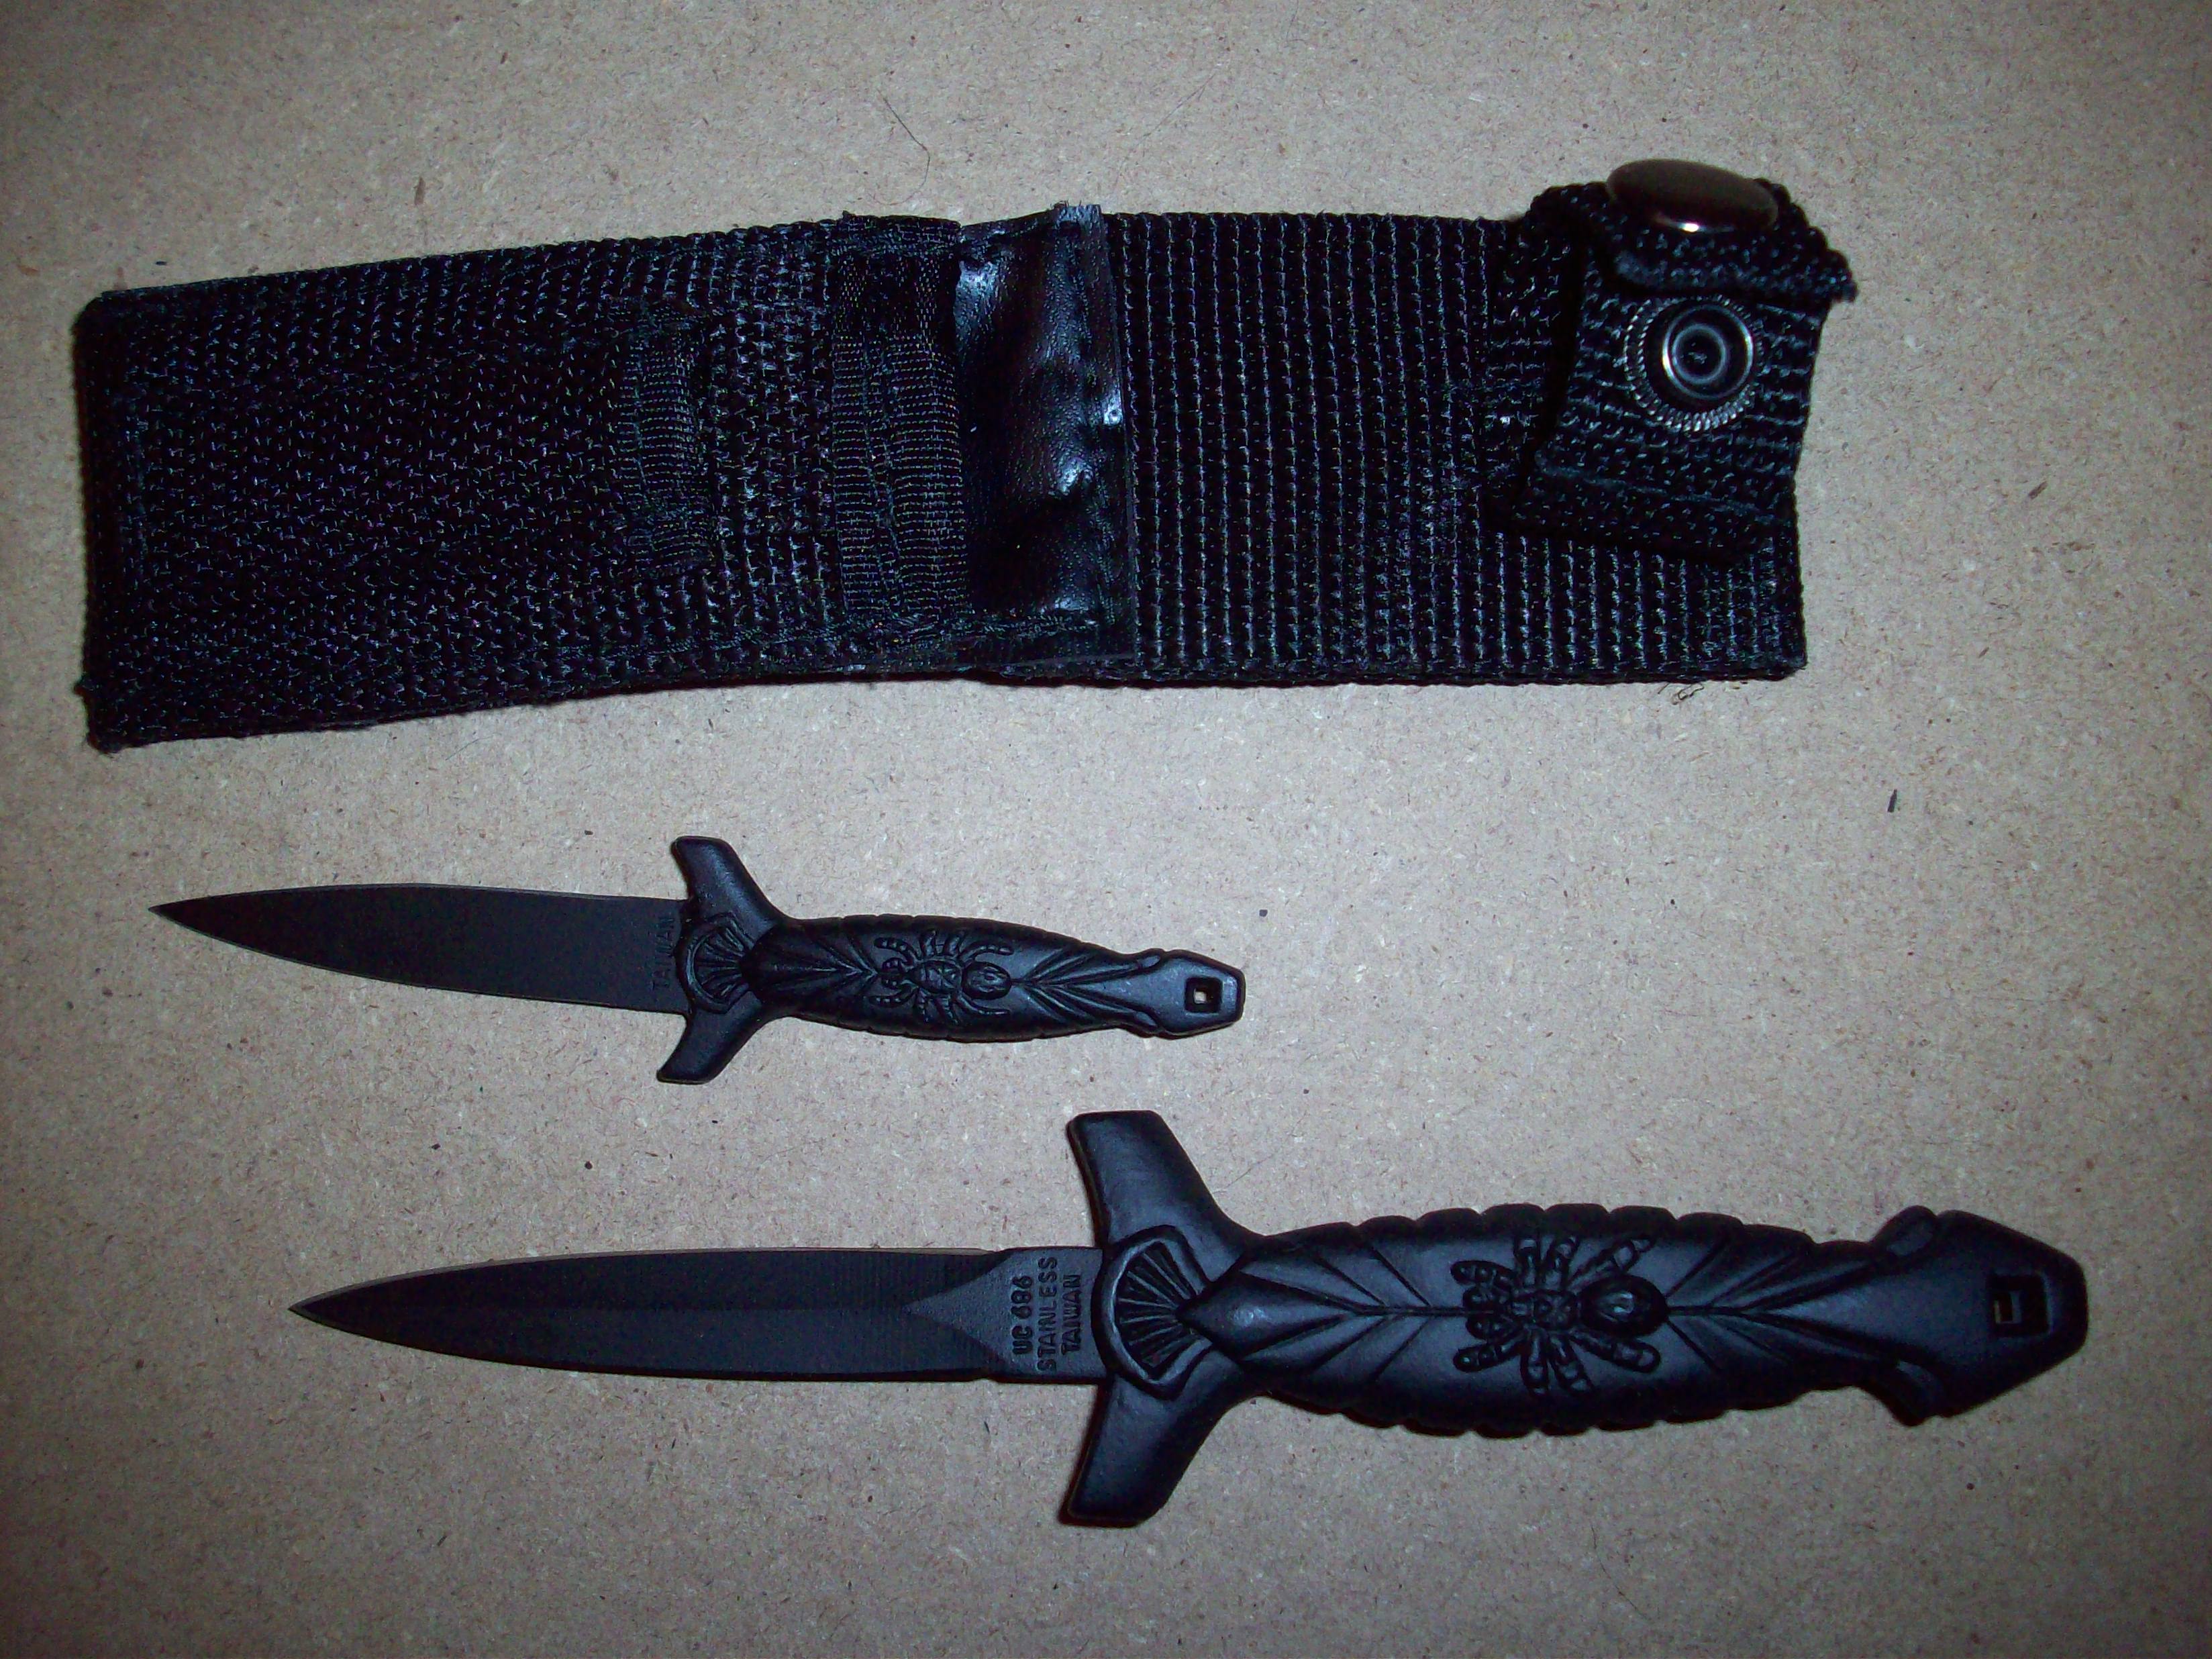 Spider double throwing knife set